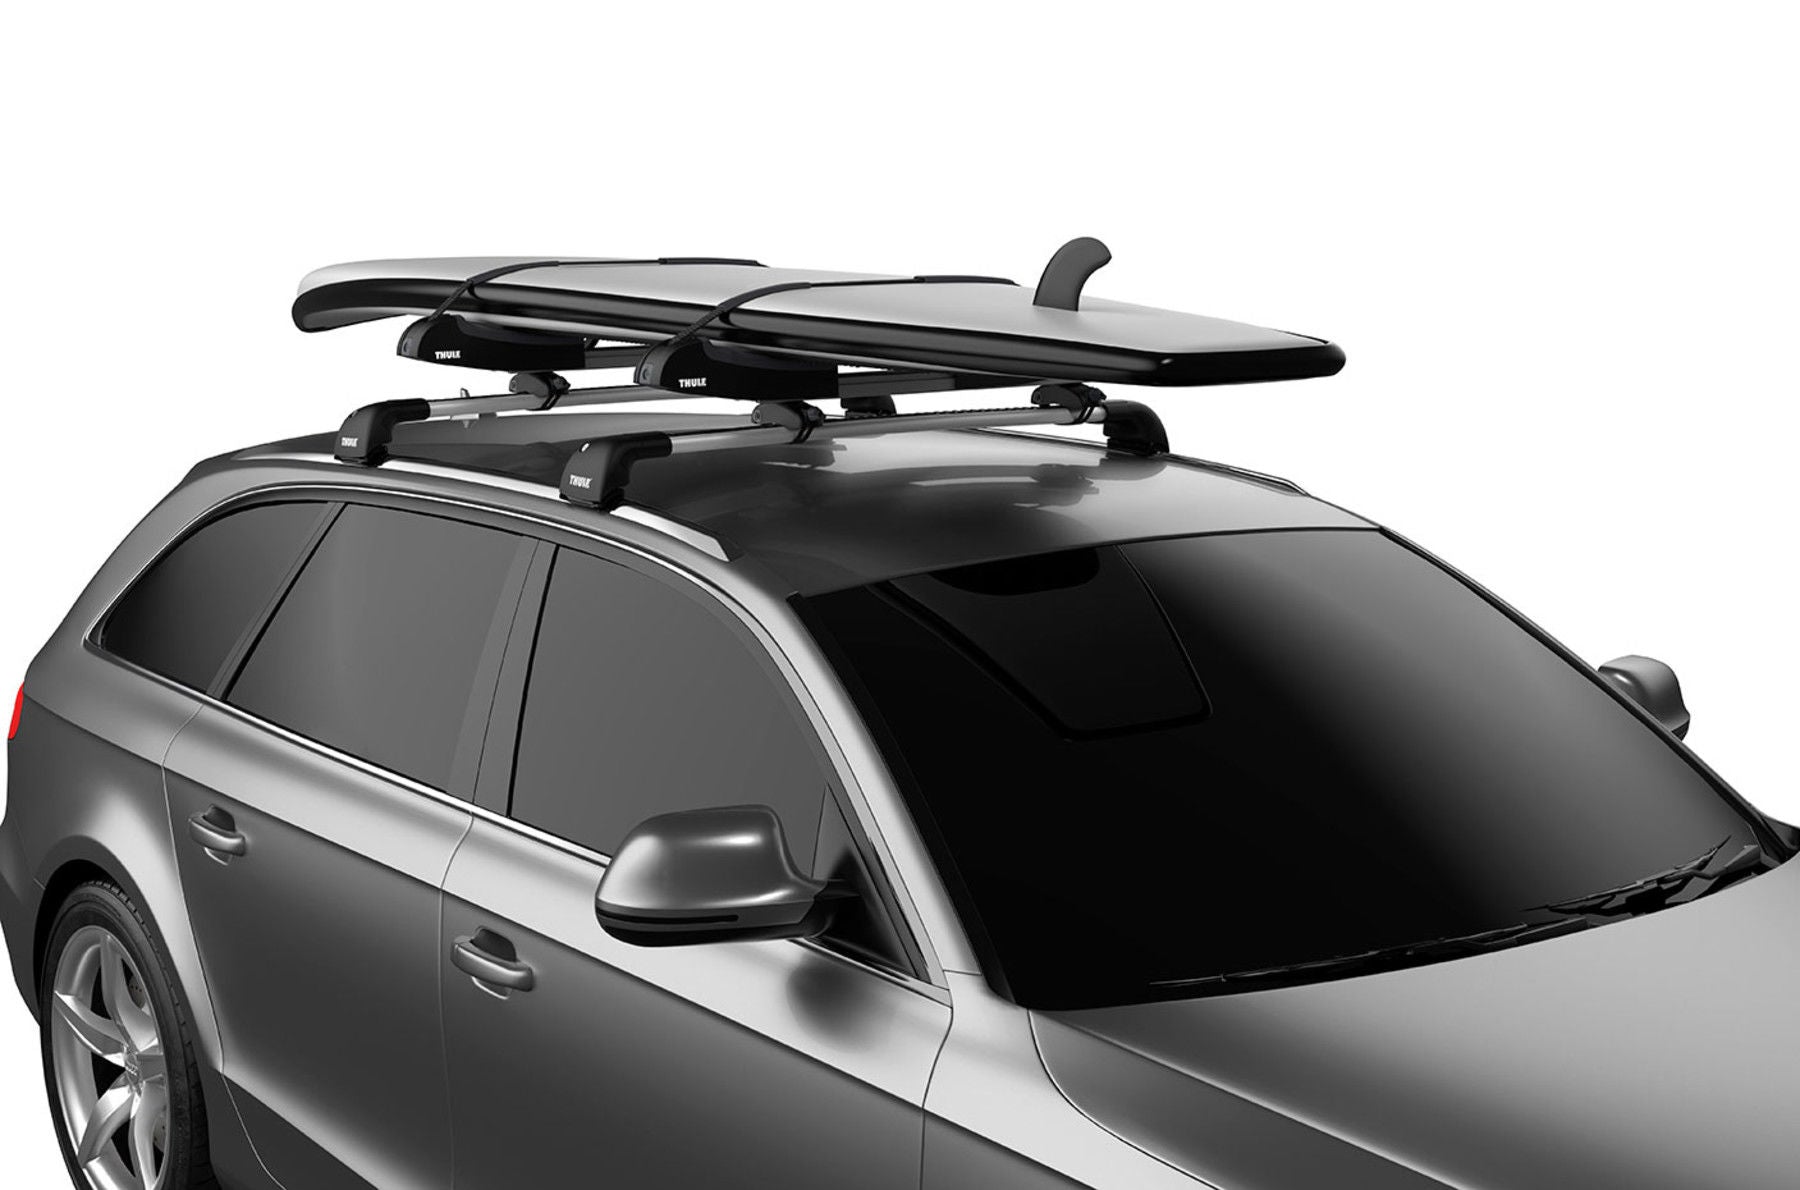 Thule 810001 - SUP Taxi XT Roof Rack